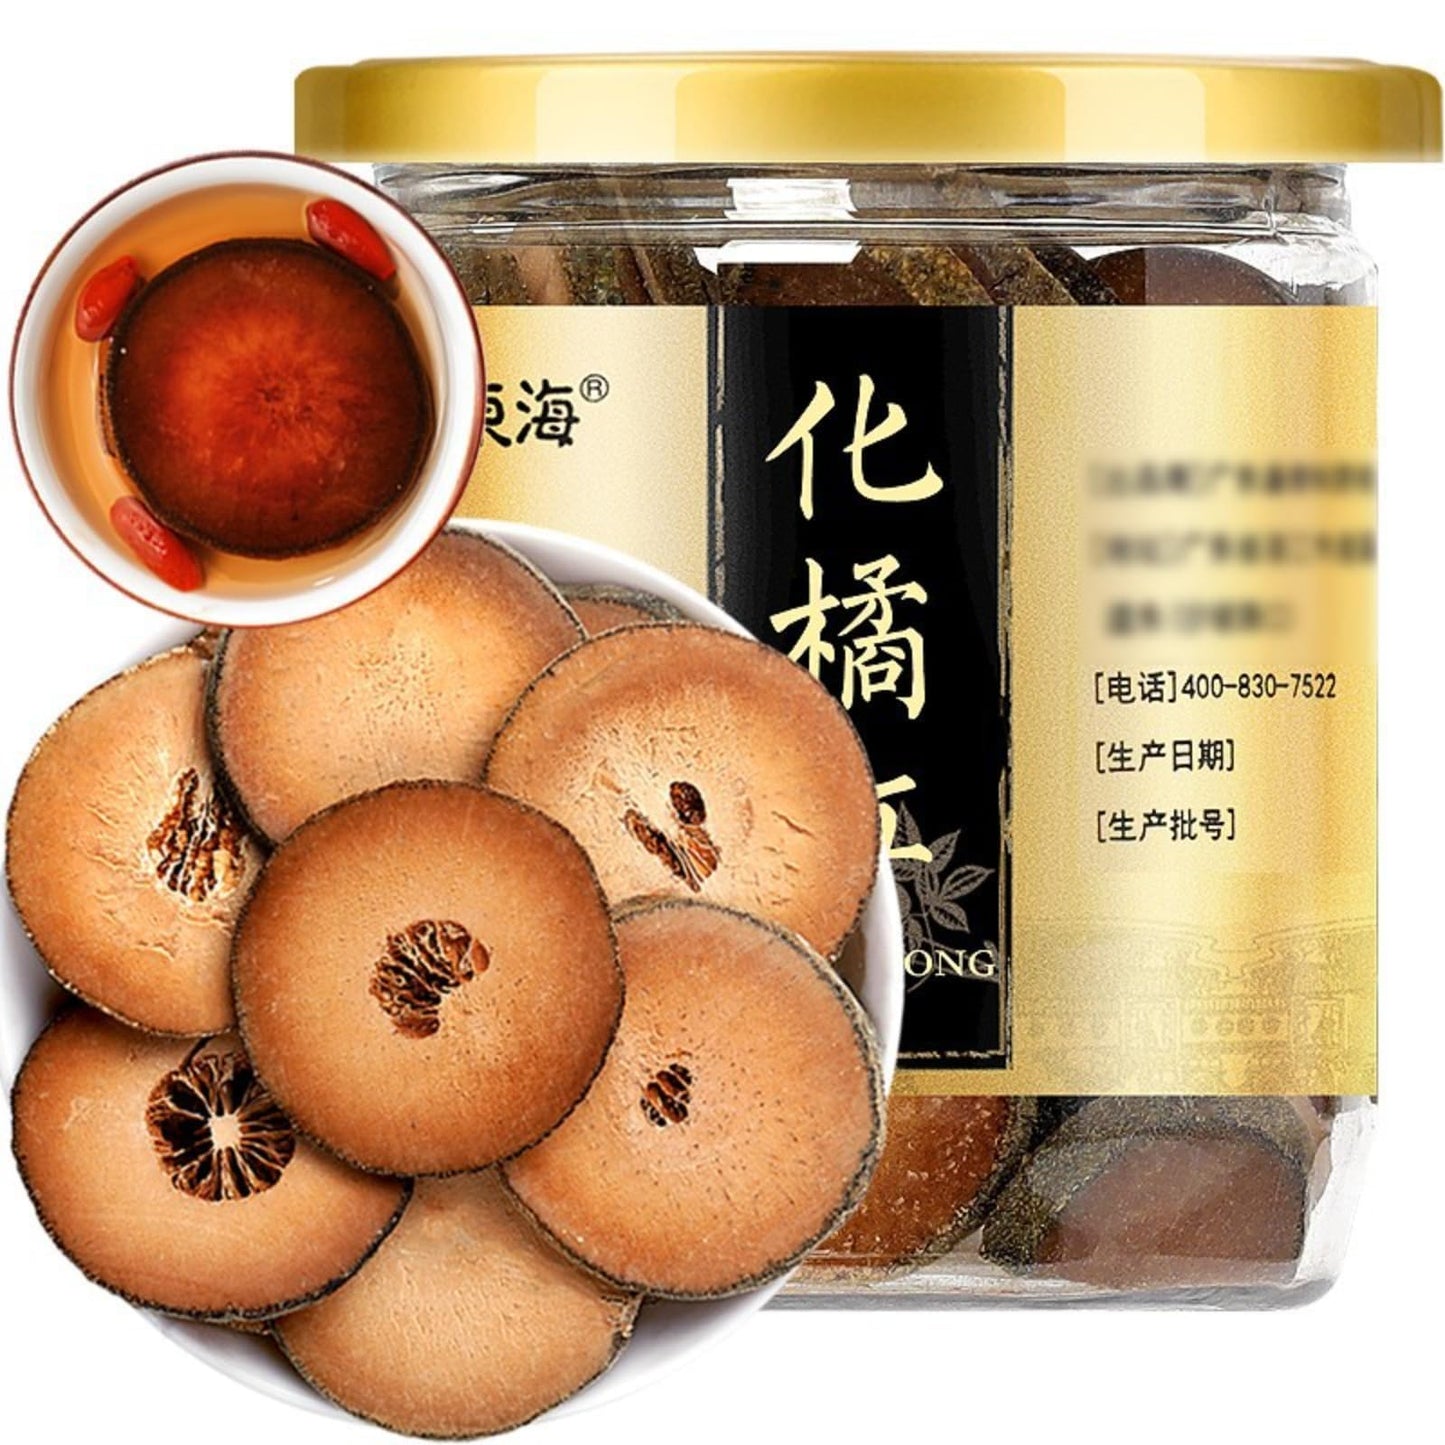 Hua Orange Red 45g (1.58oz) Canned Naturally Dried The More It Ages, The Better It Smells, Herbal tea 福东海化橘红45g/罐八仙果化橘红膏陈年化橘红